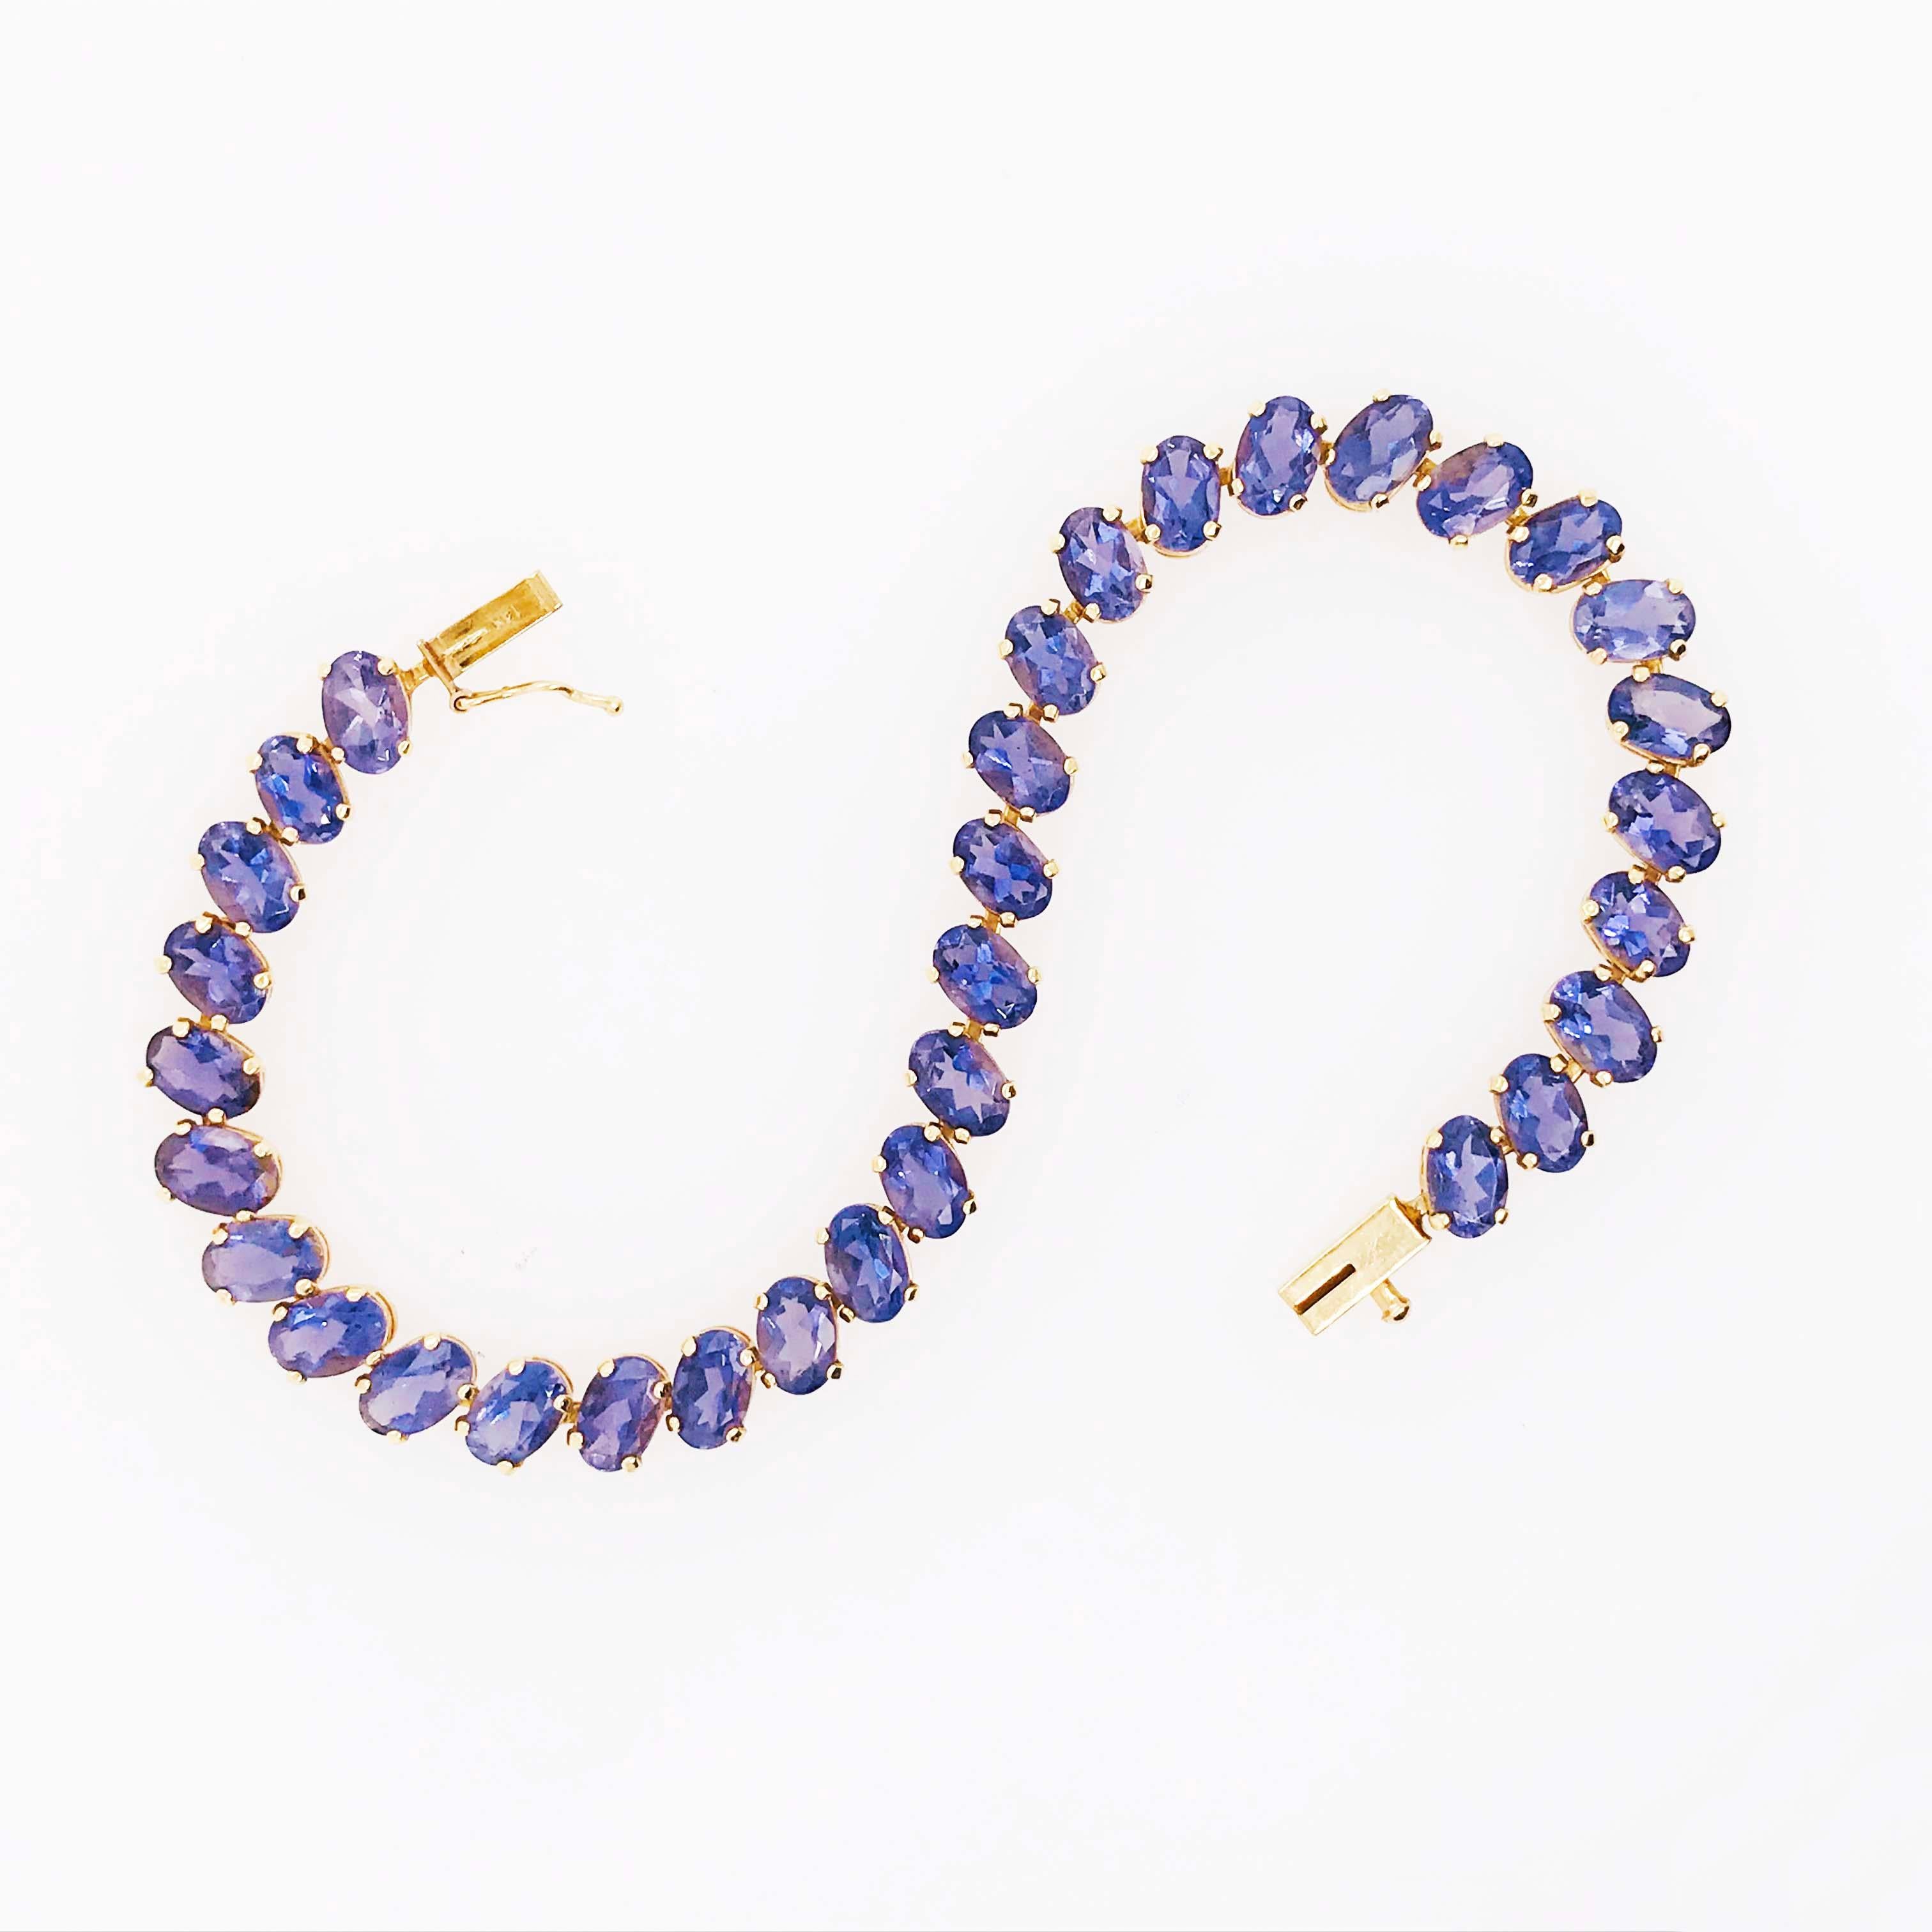 This 14kt Gold Tanzanite Bracelet is a fine jewelry fashion piece! With genuine tanzanite gemstones going around the entire tennis bracelet. There is a total Tanzanite weight of 15 carats! The 15 carat  Tanzanite gemstones are an oval, faceted shape